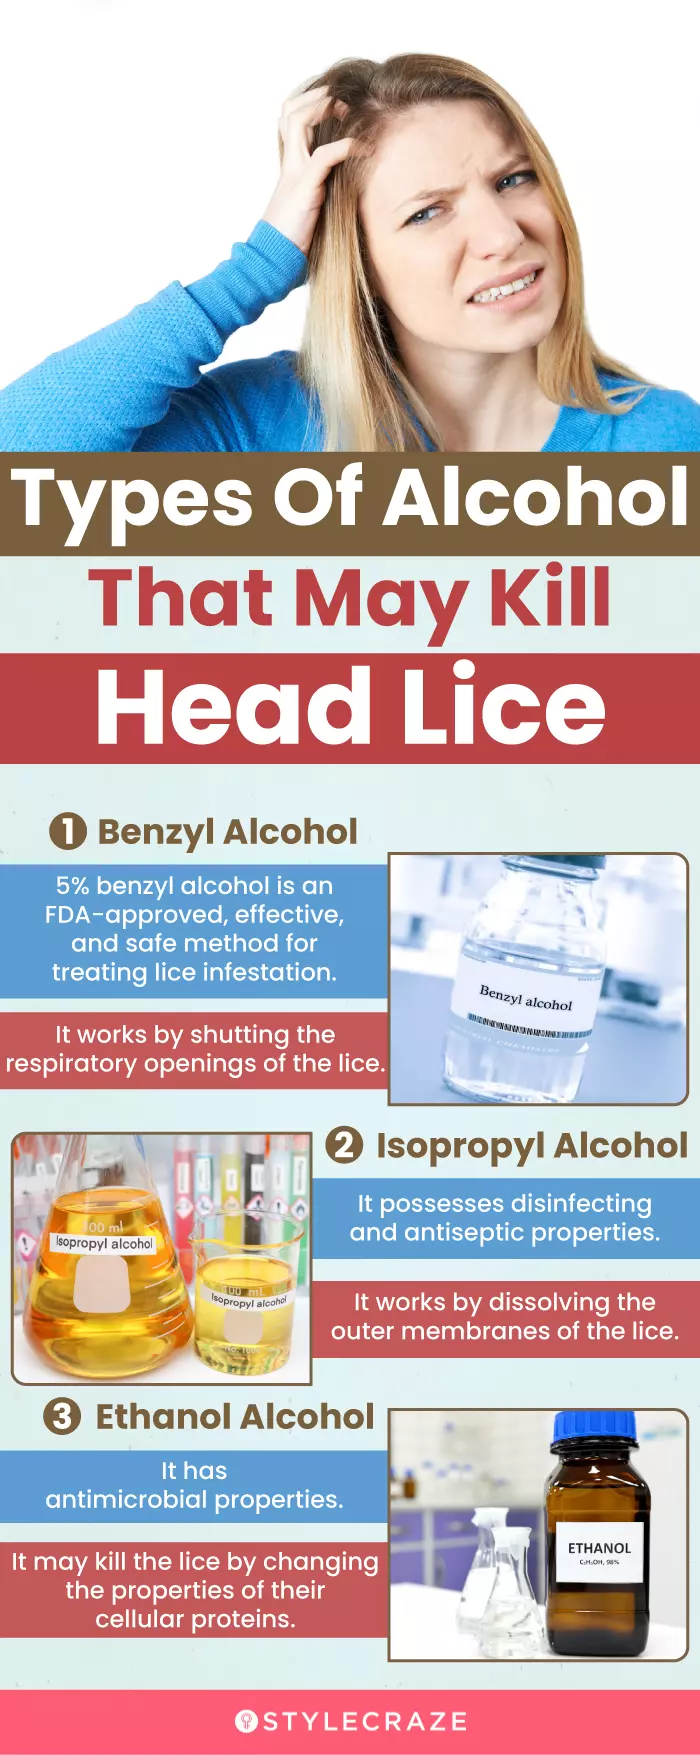 types of alcohol that may kill head lice (infographic)